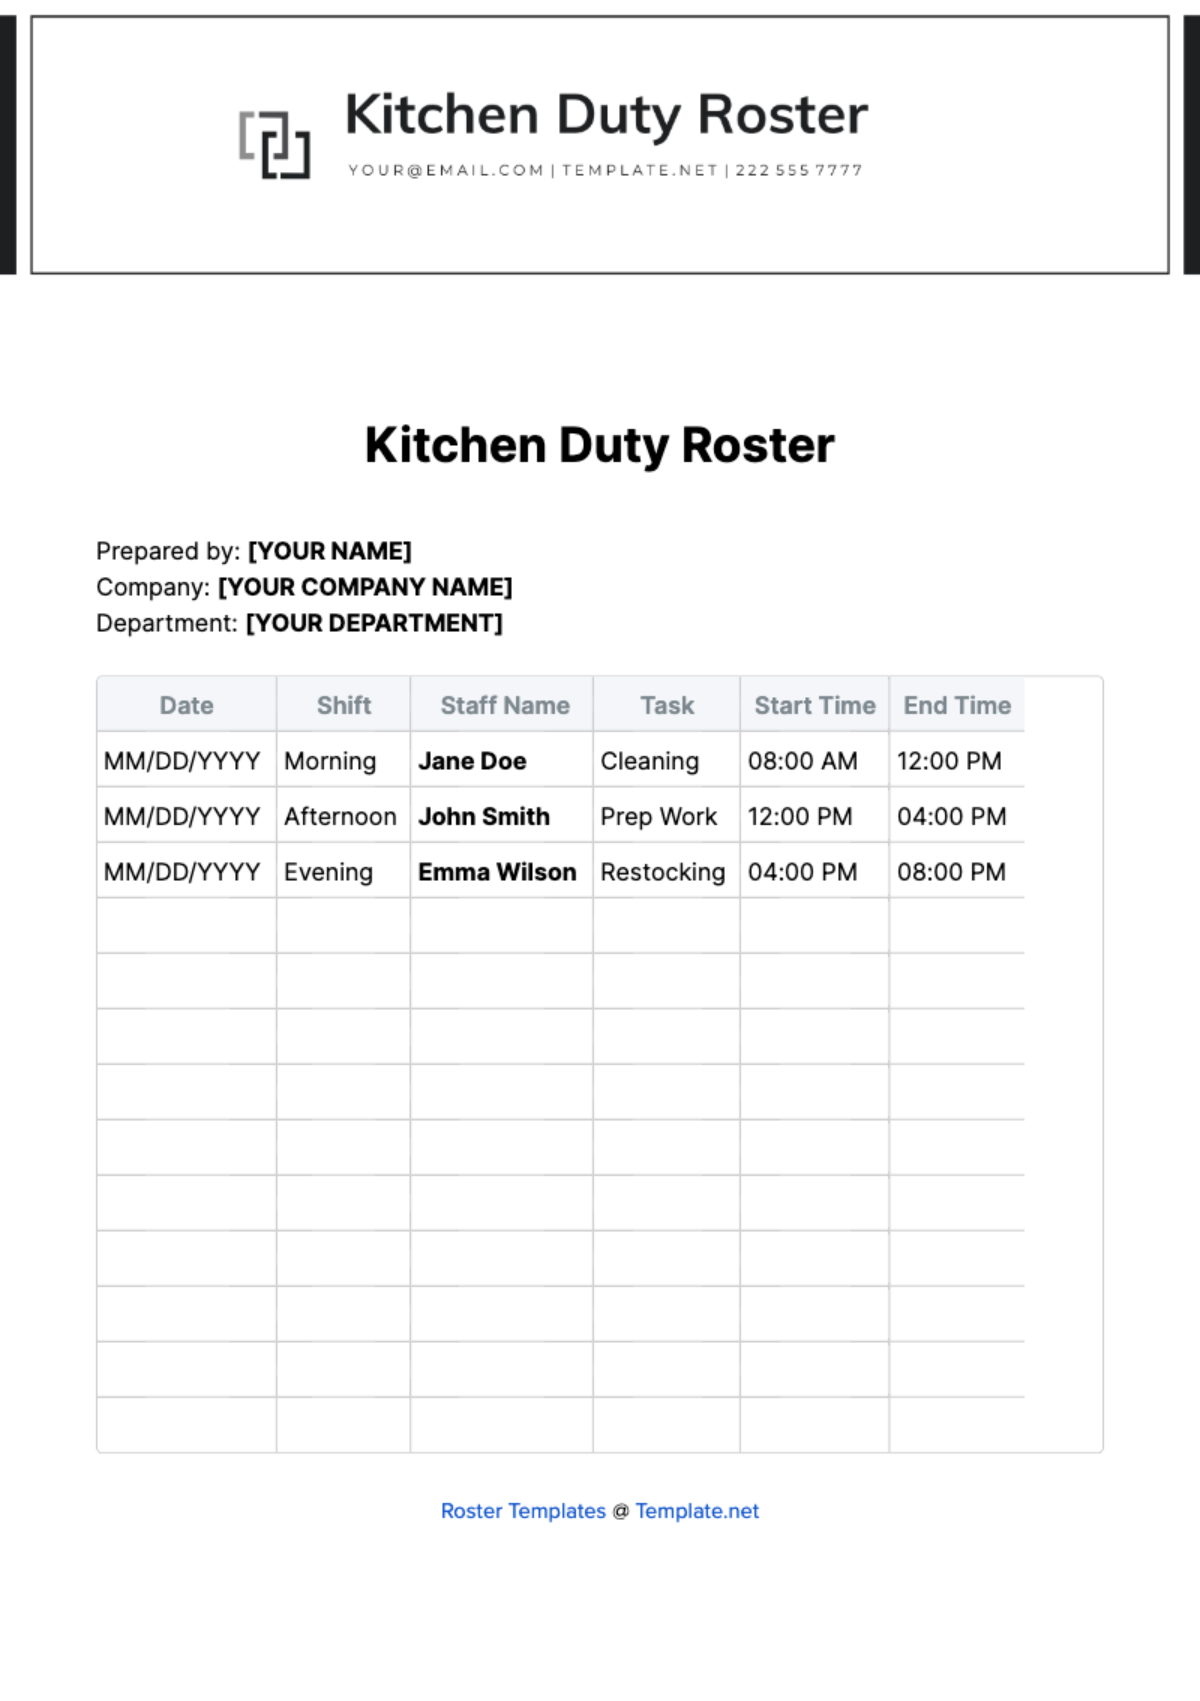 Free Kitchen Duty Roster Template